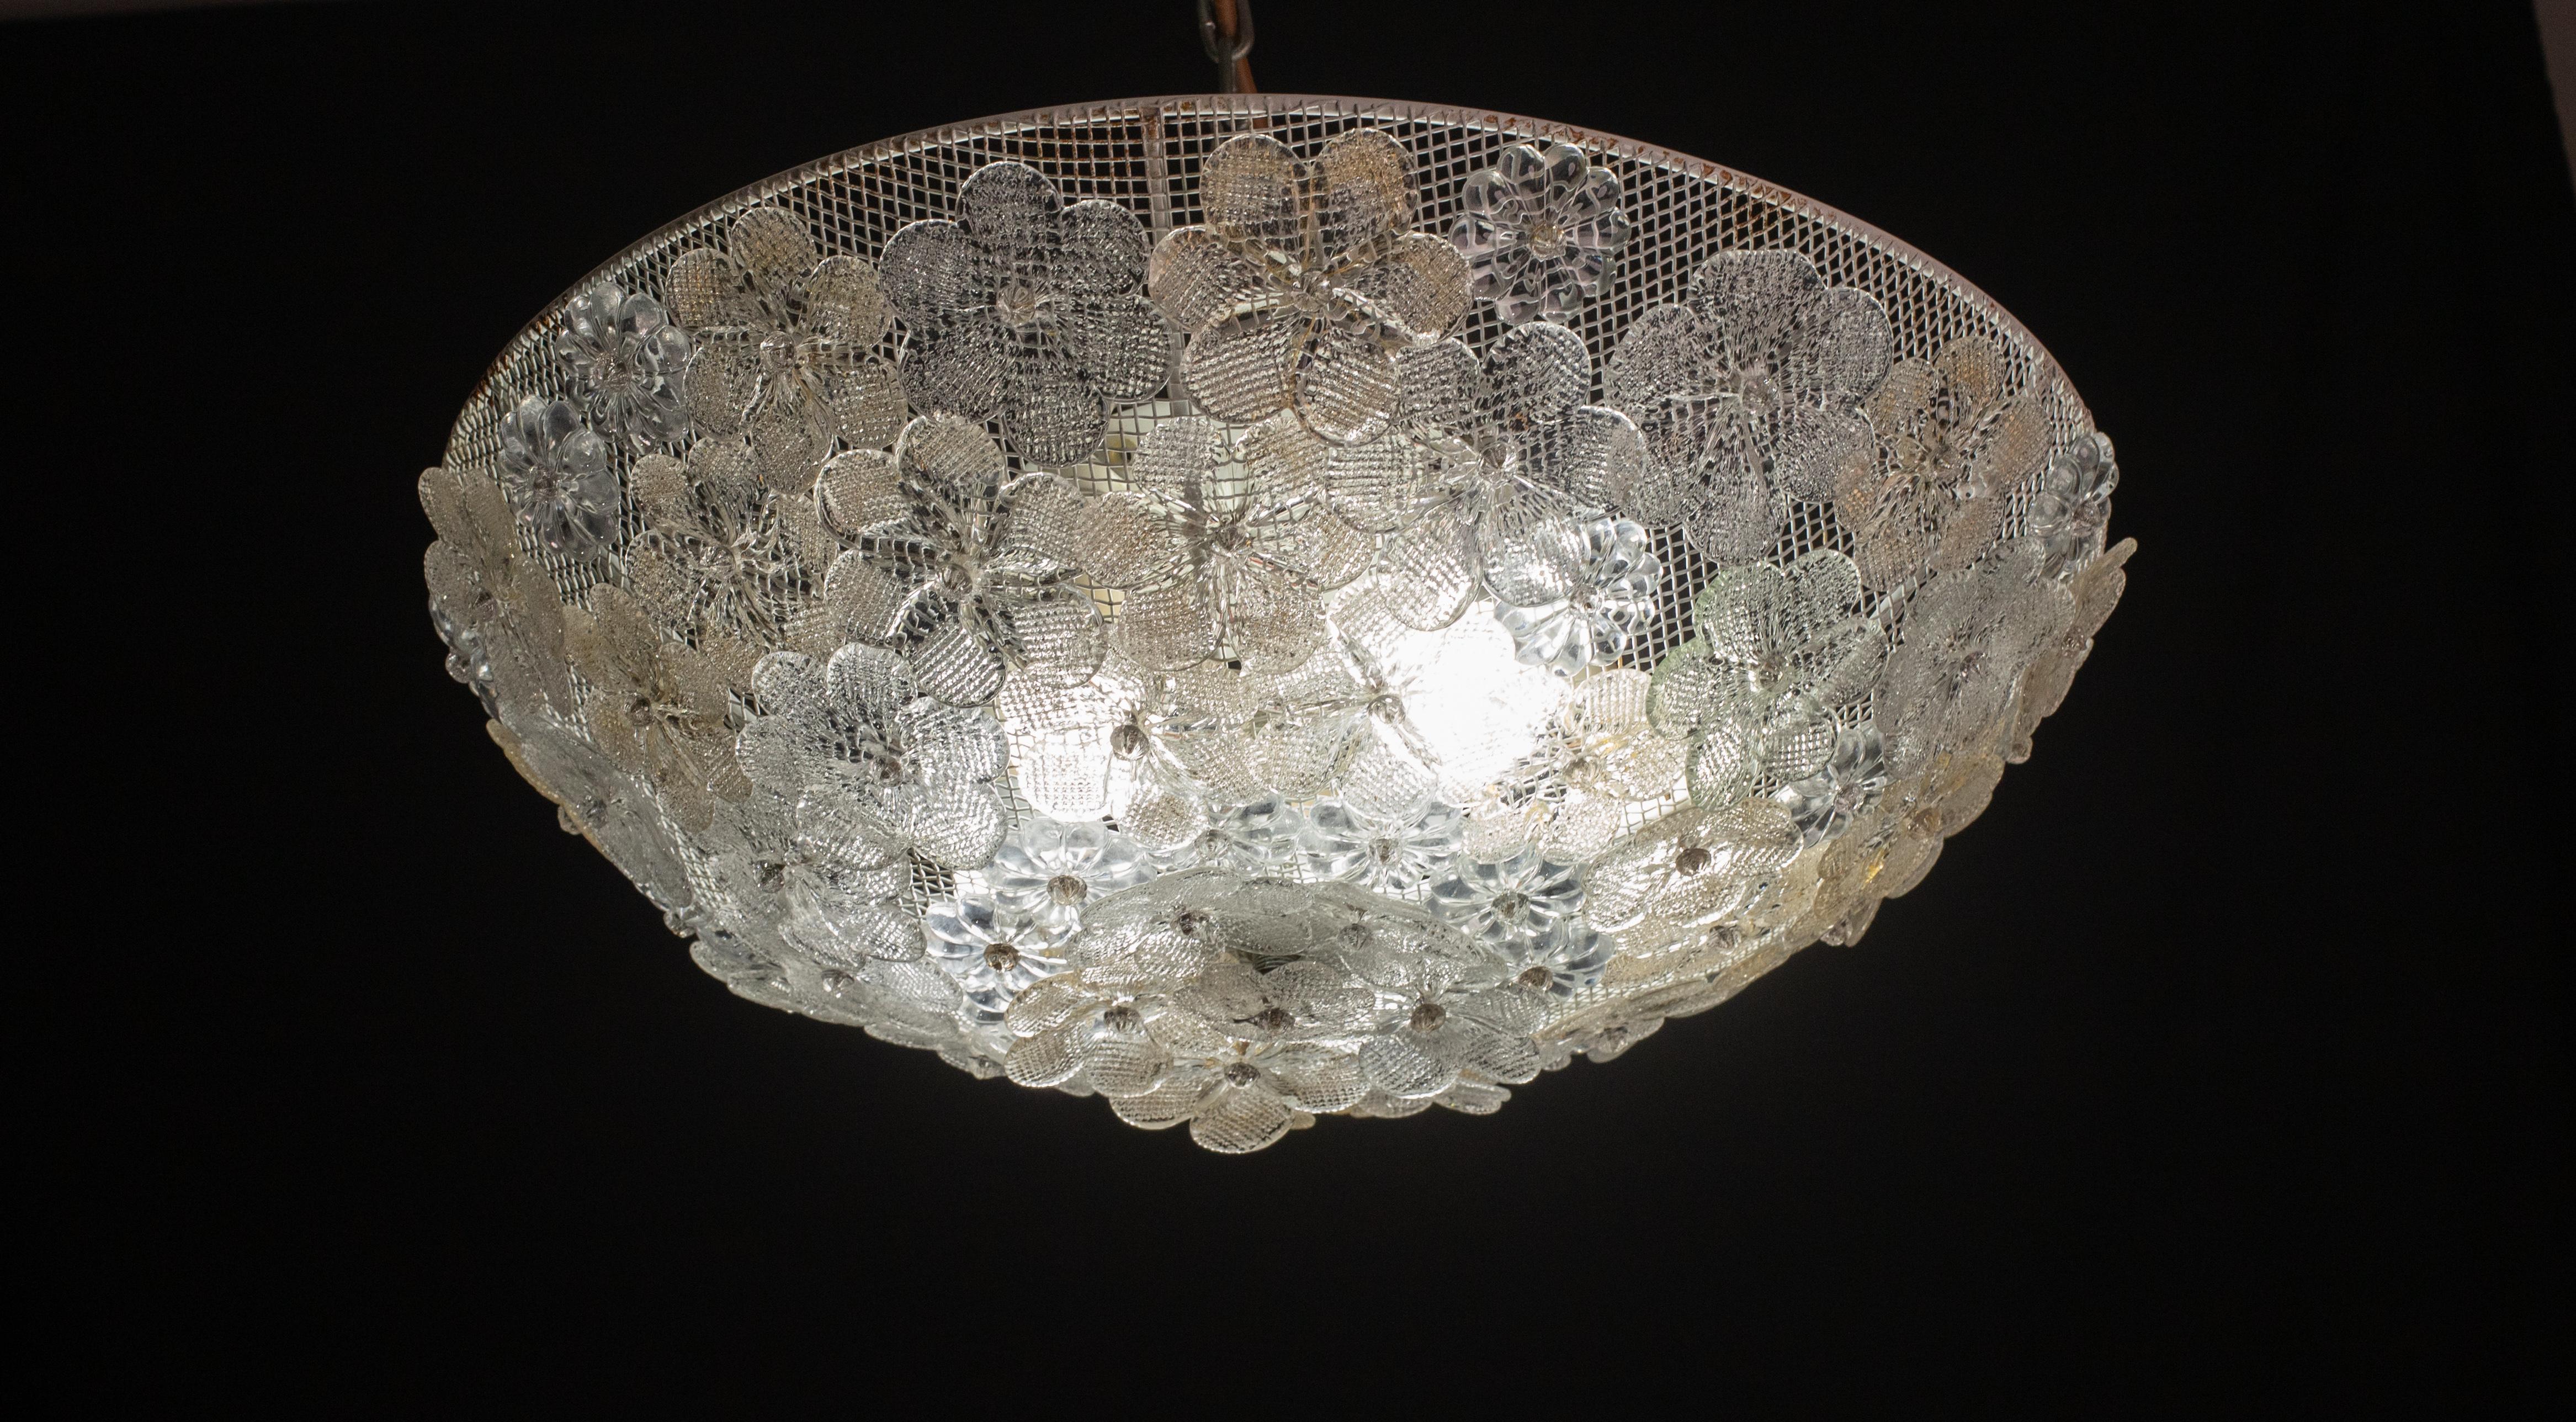 Fantastic set of 3 Light: 2 wall light and one Ceiling Light.

Ceiling Light:

This amazing flower basket is made of dozen of precious Murano flowers glasses.
Available a pair of extraordinary sconces.
5 E 14 light bulbs, possible to rewire for